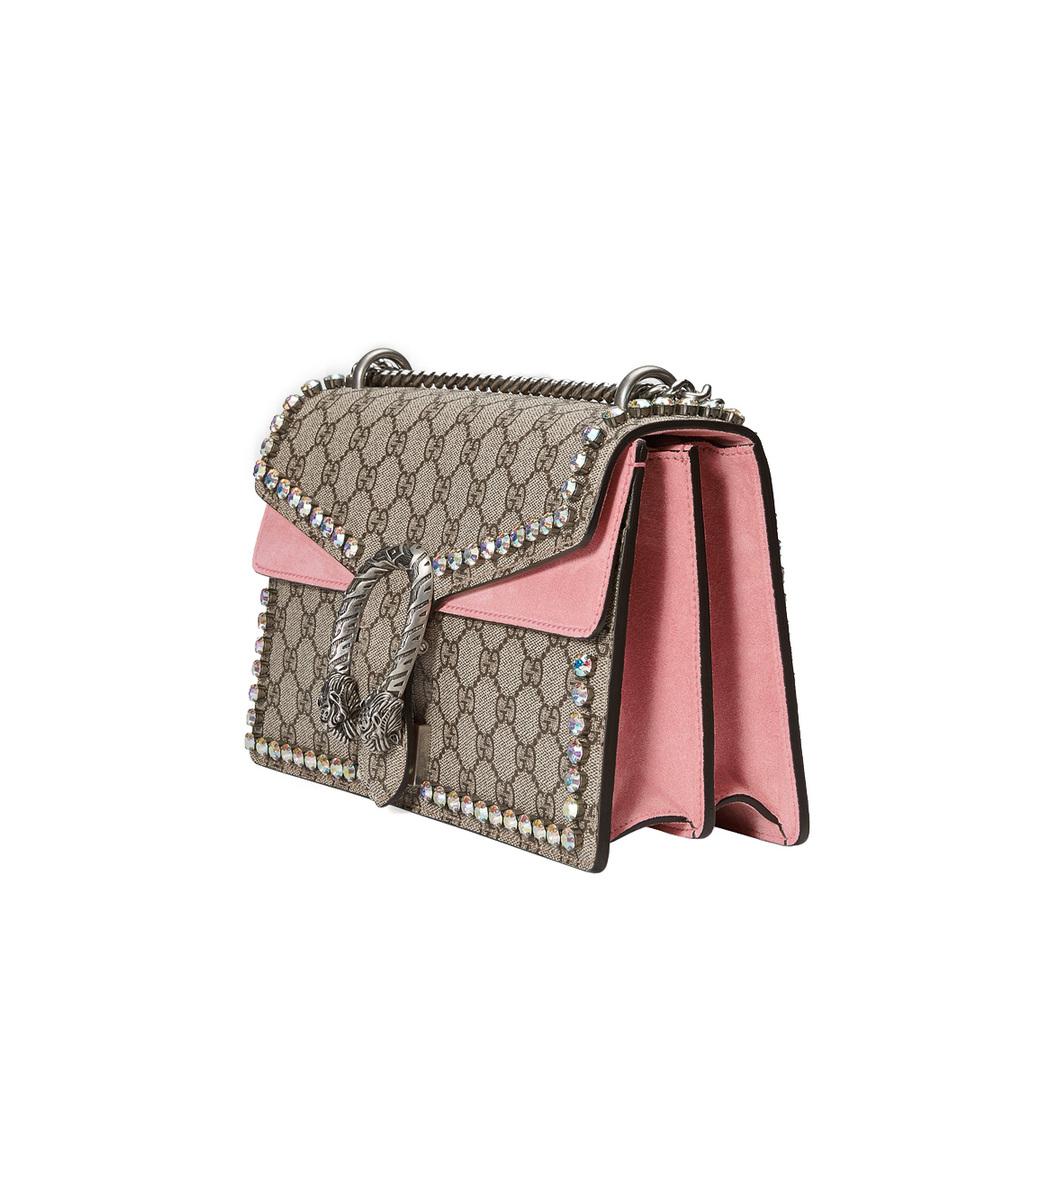 Gucci Canvas Pink Dionysus Gg Supreme Shoulder Bag With Crystals - Lyst